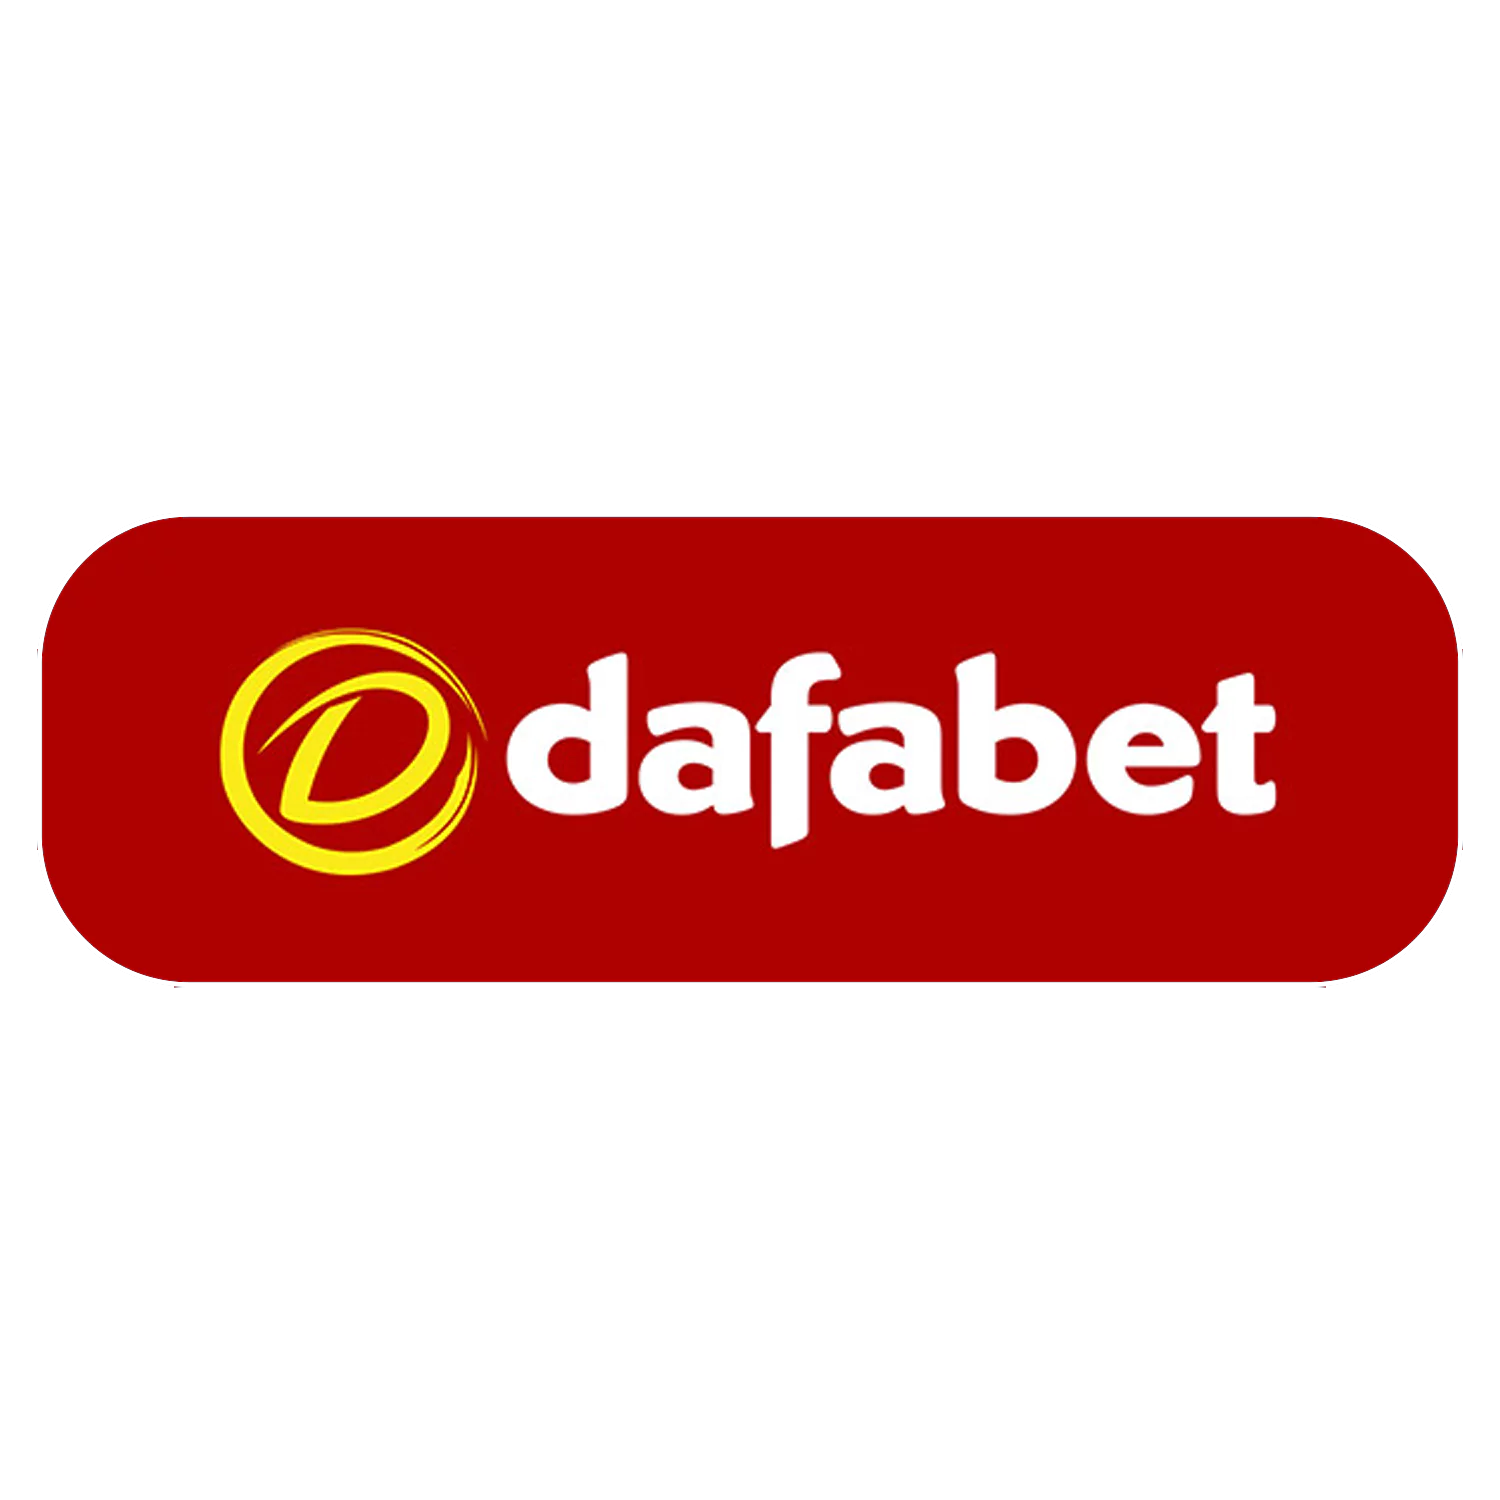 Dafabet is a convenient betting site for Indian users.